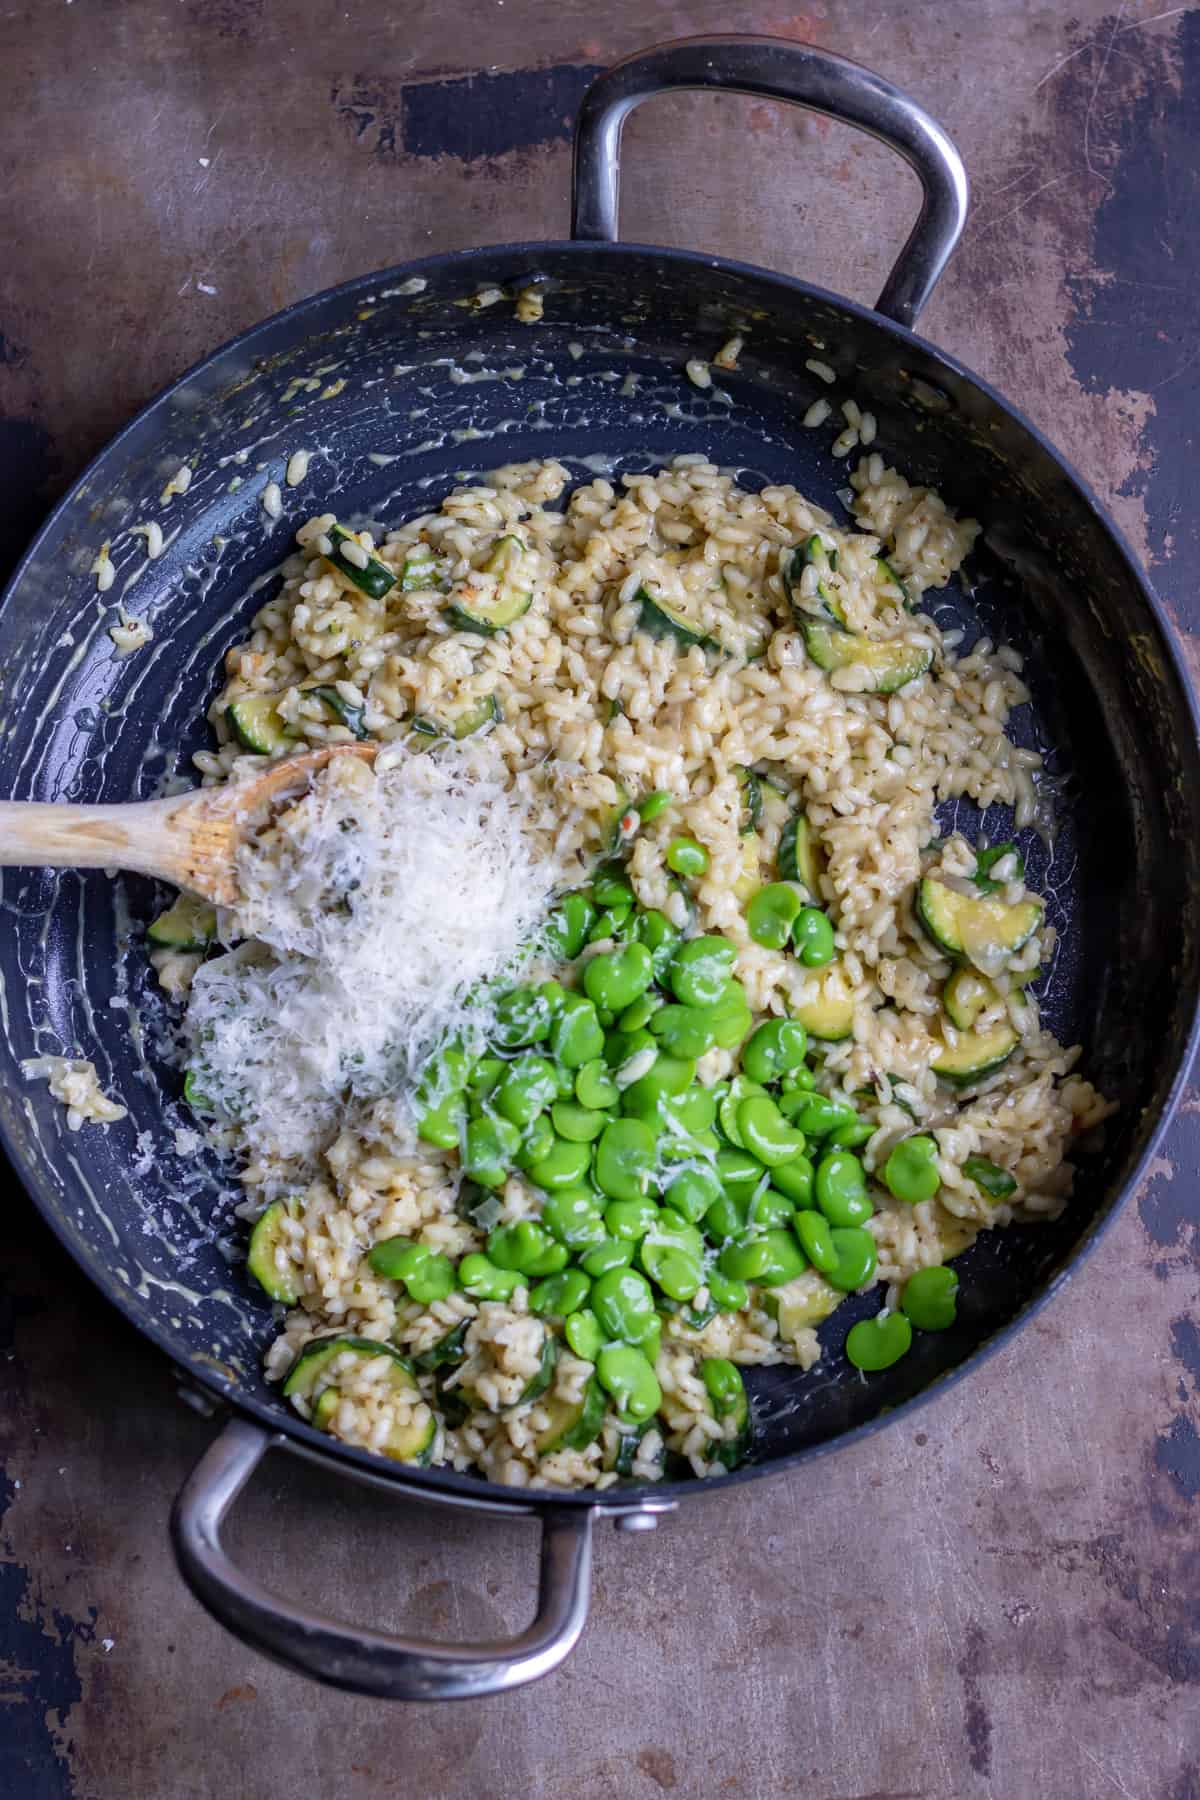 Adding parmesan and broad beans to the pan.